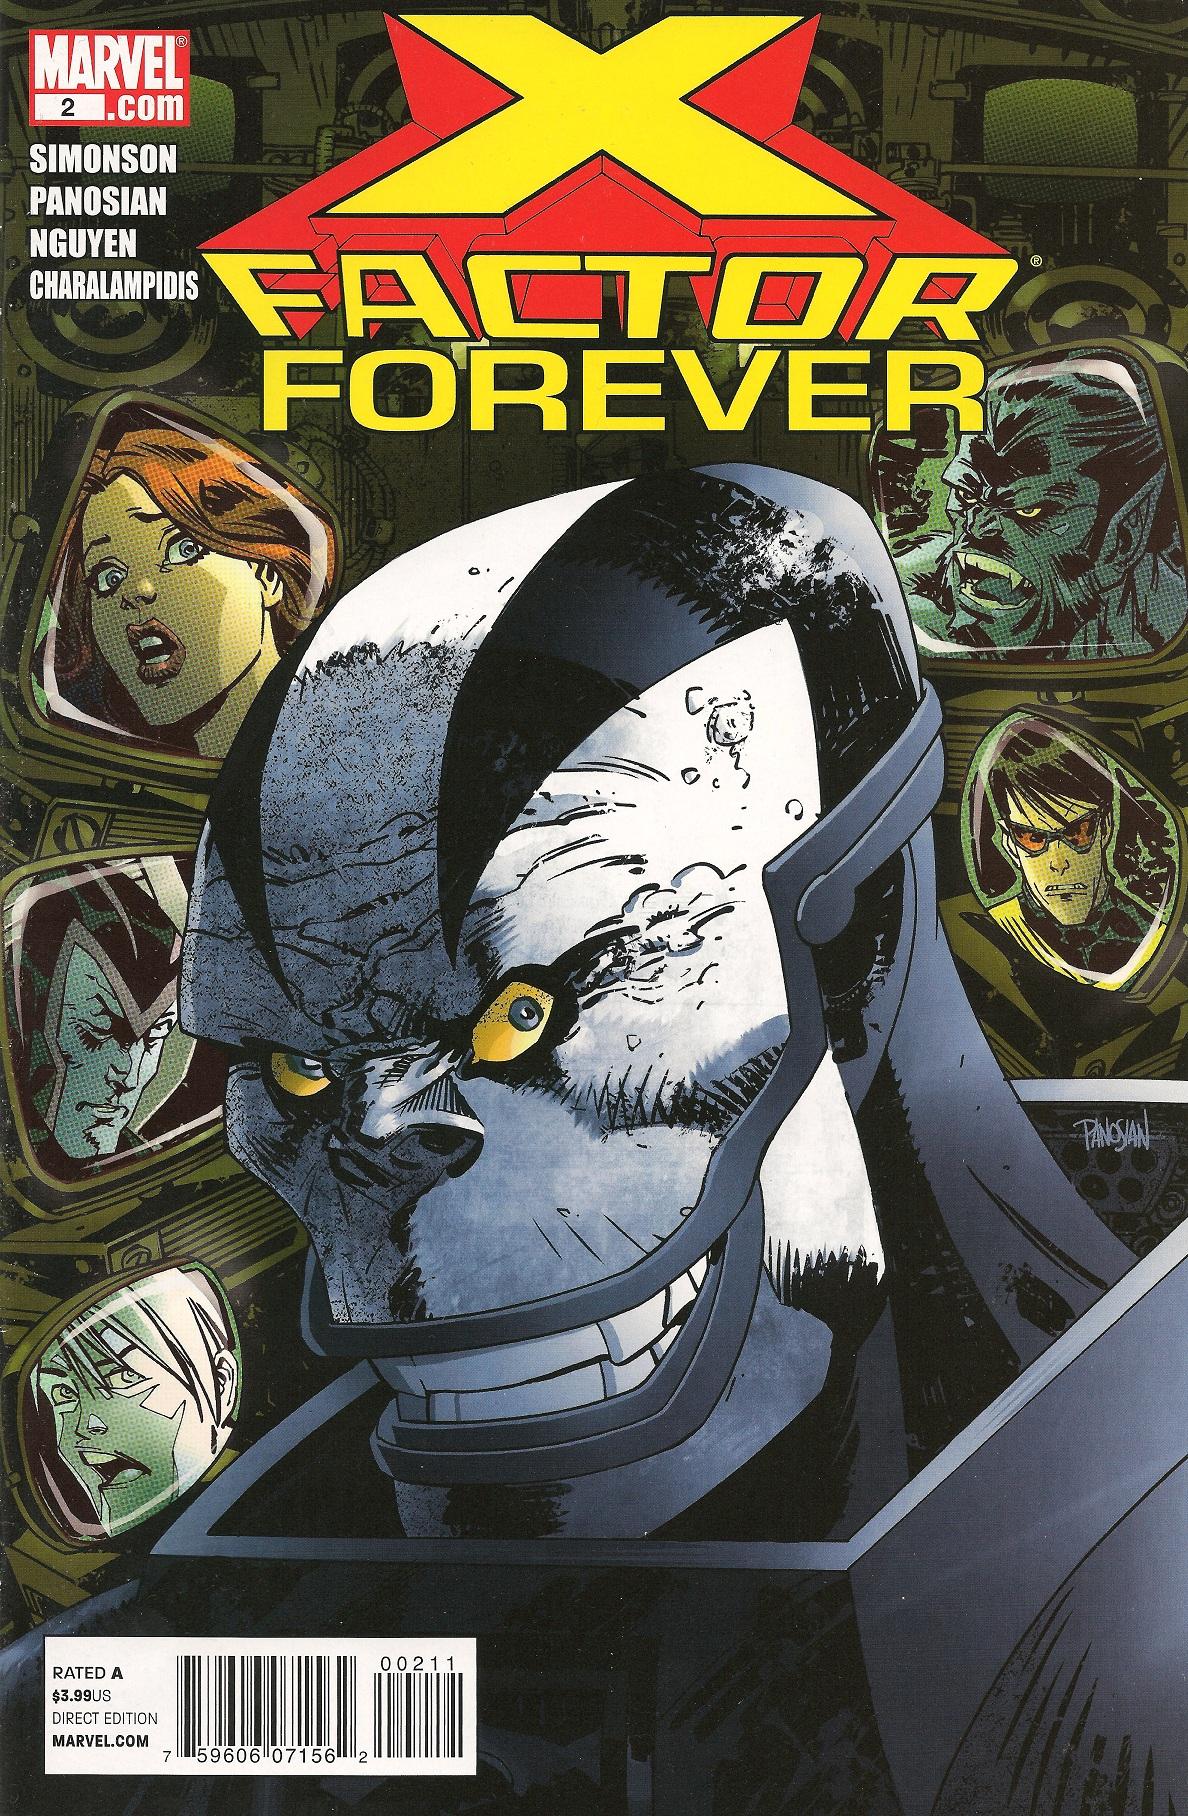 X-Factor Forever Vol. 1 #2